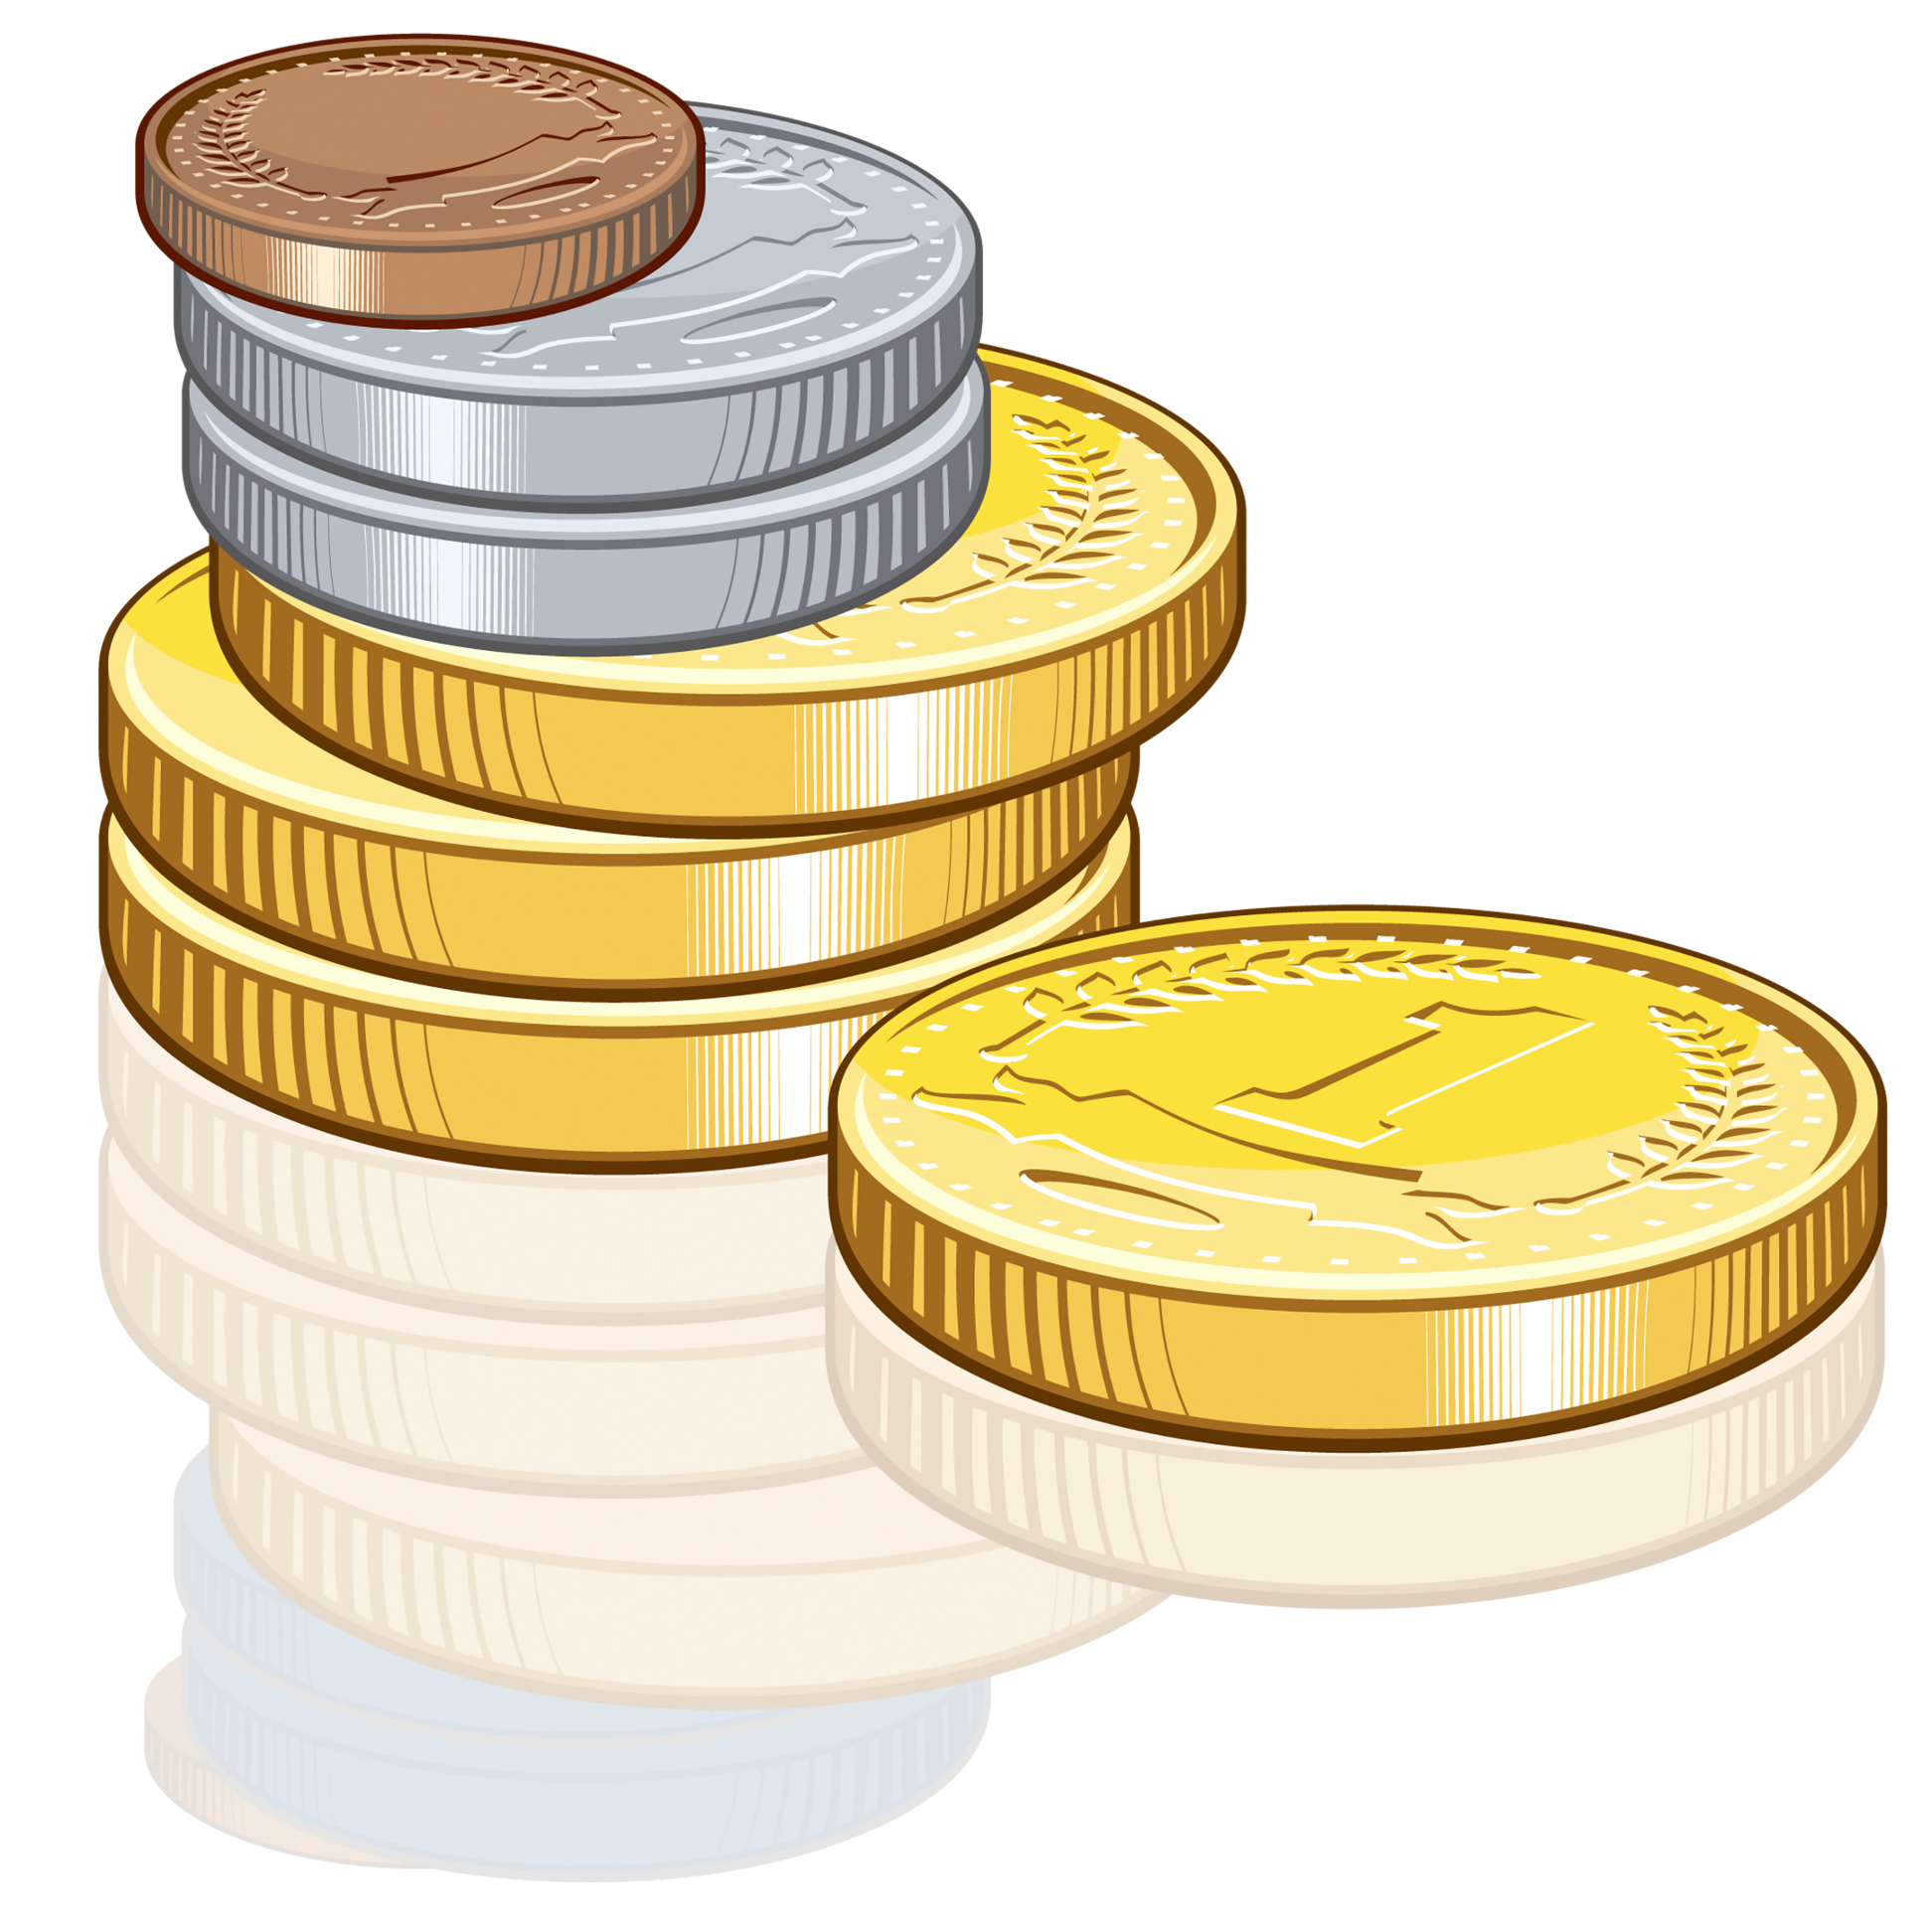 Coin clipart image